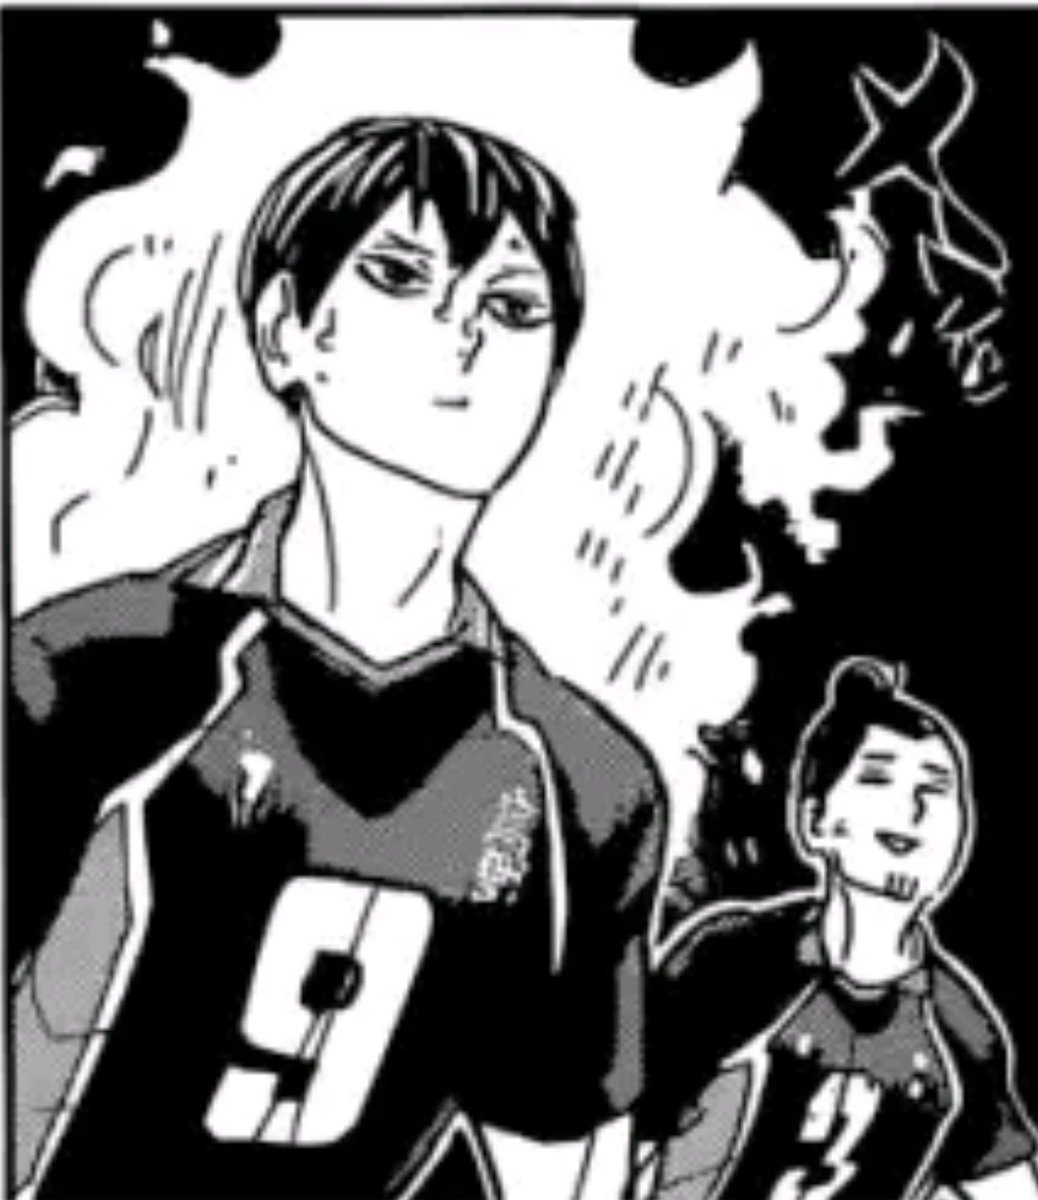 Not at Kageyama getting riled up when Yamaguchi had a service ace yet he hasn't.